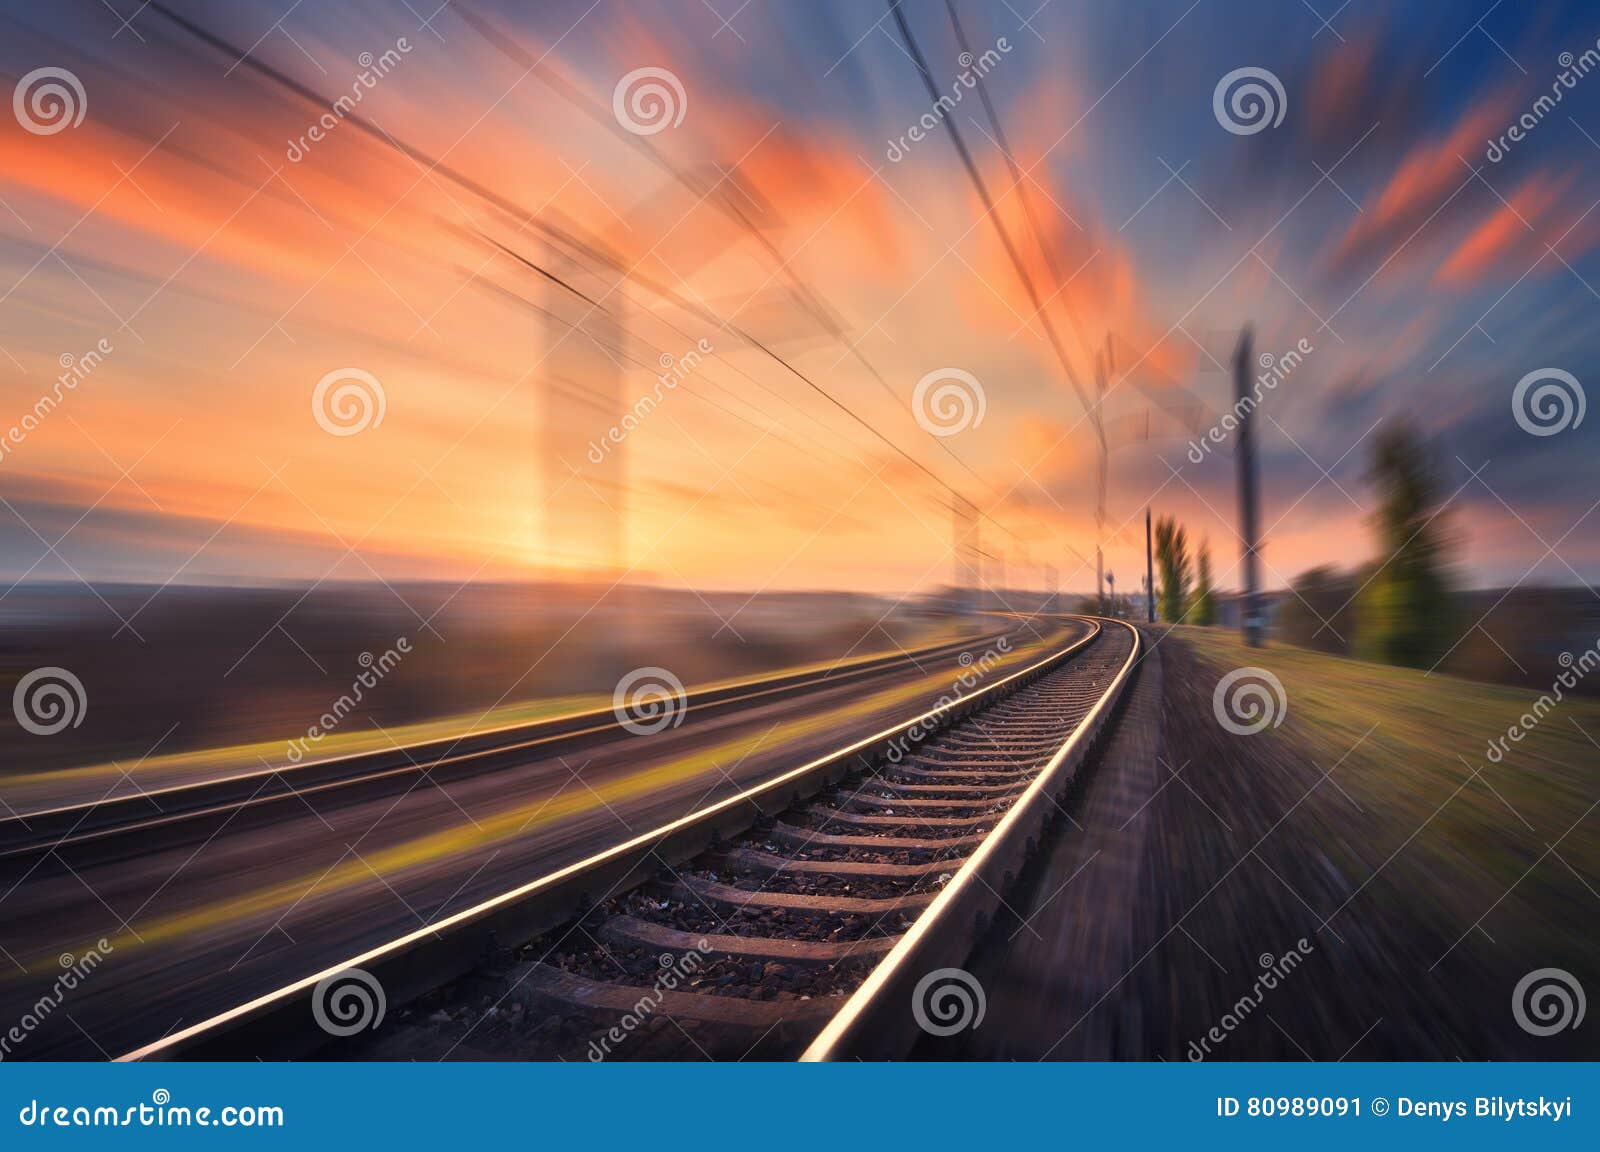 railroad in motion at sunset. blurred railway station